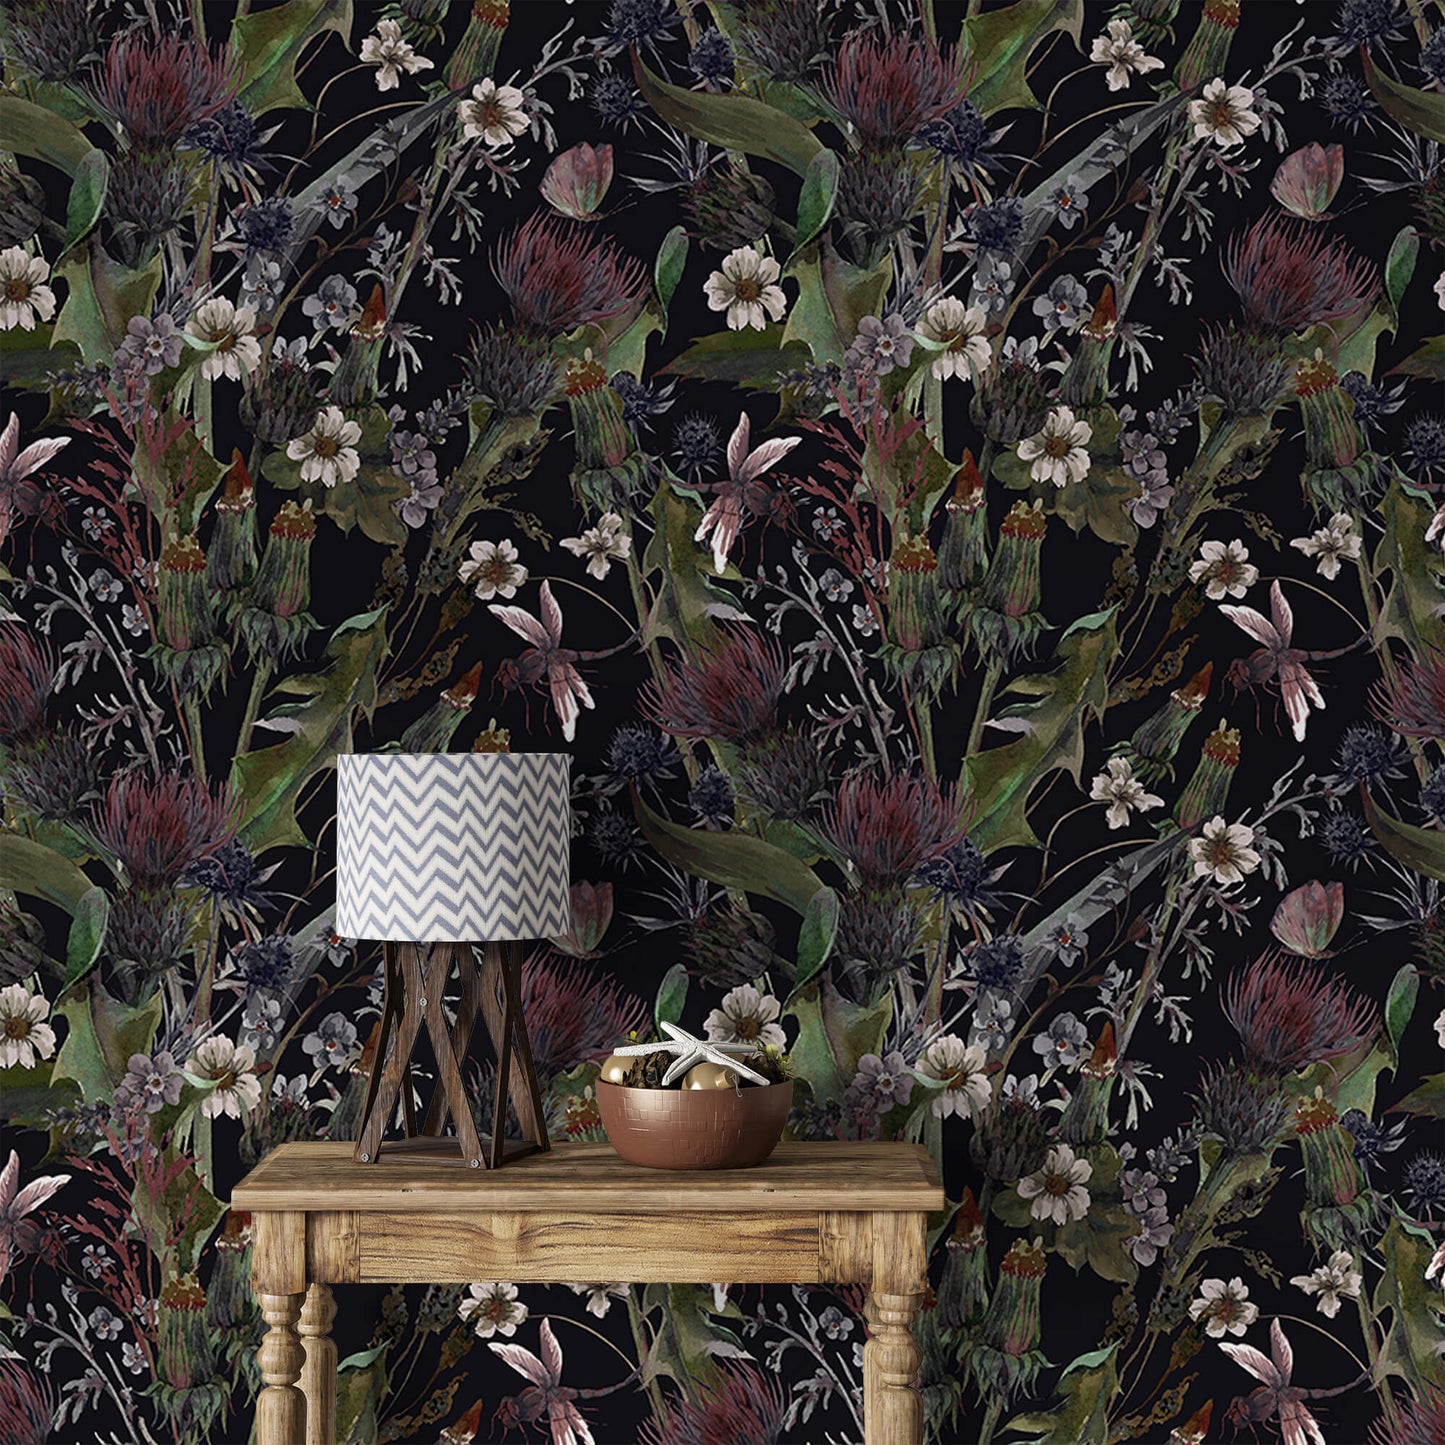 Whimsical Vintage Garden Wallpaper: Step into a world of nostalgic charm with this delightful design, featuring whimsical vintage-inspired garden motifs, perfect for adding a touch of whimsy and elegance to your space